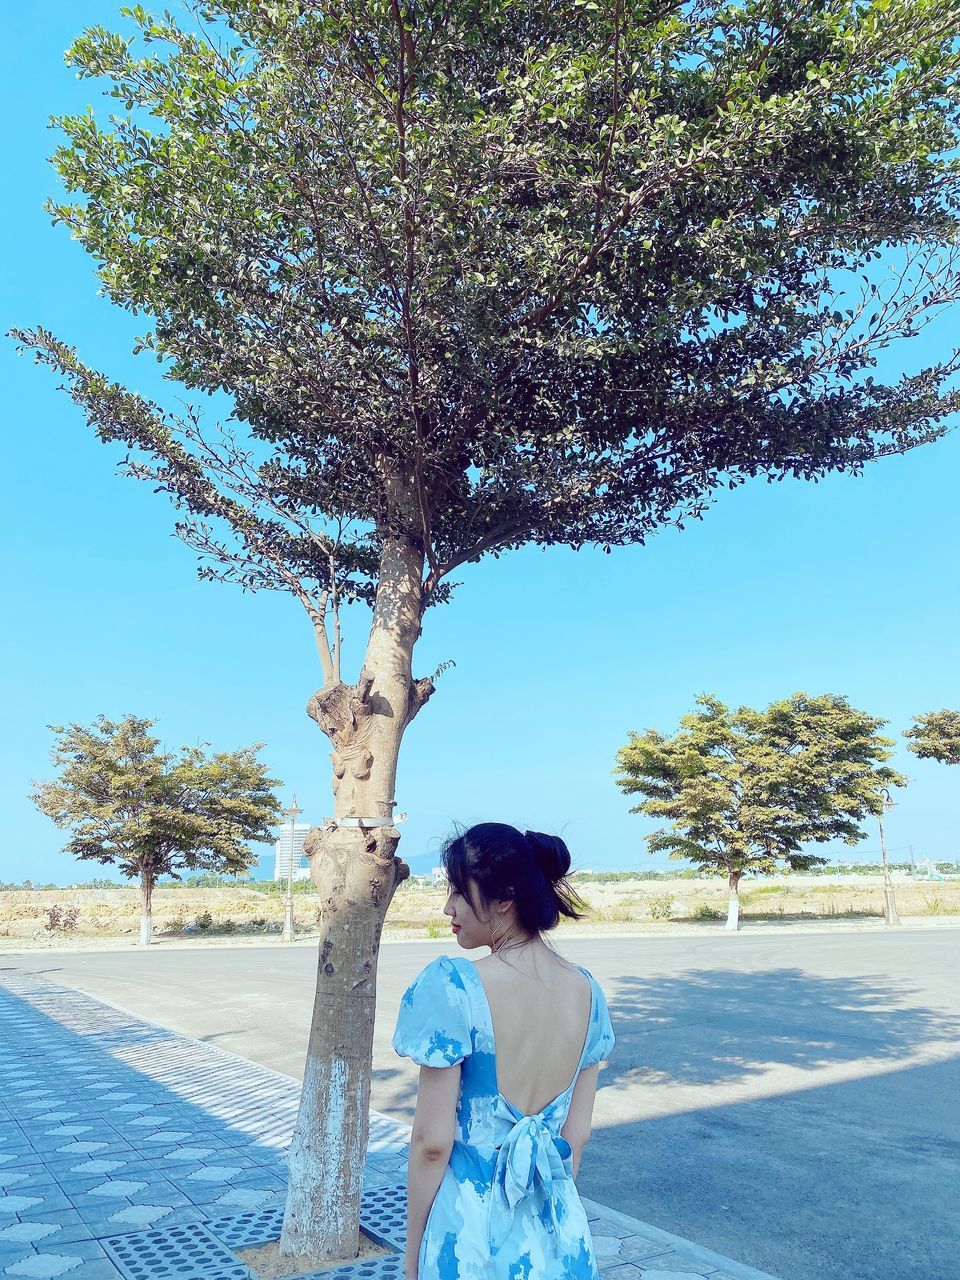 tree, plant, one person, nature, flower, women, blue, adult, spring, day, rear view, standing, sky, young adult, sunlight, outdoors, fashion, full length, clothing, road, female, leisure activity, casual clothing, growth, lifestyles, hairstyle, dress, beauty in nature, looking, person, footpath, sunny, transportation